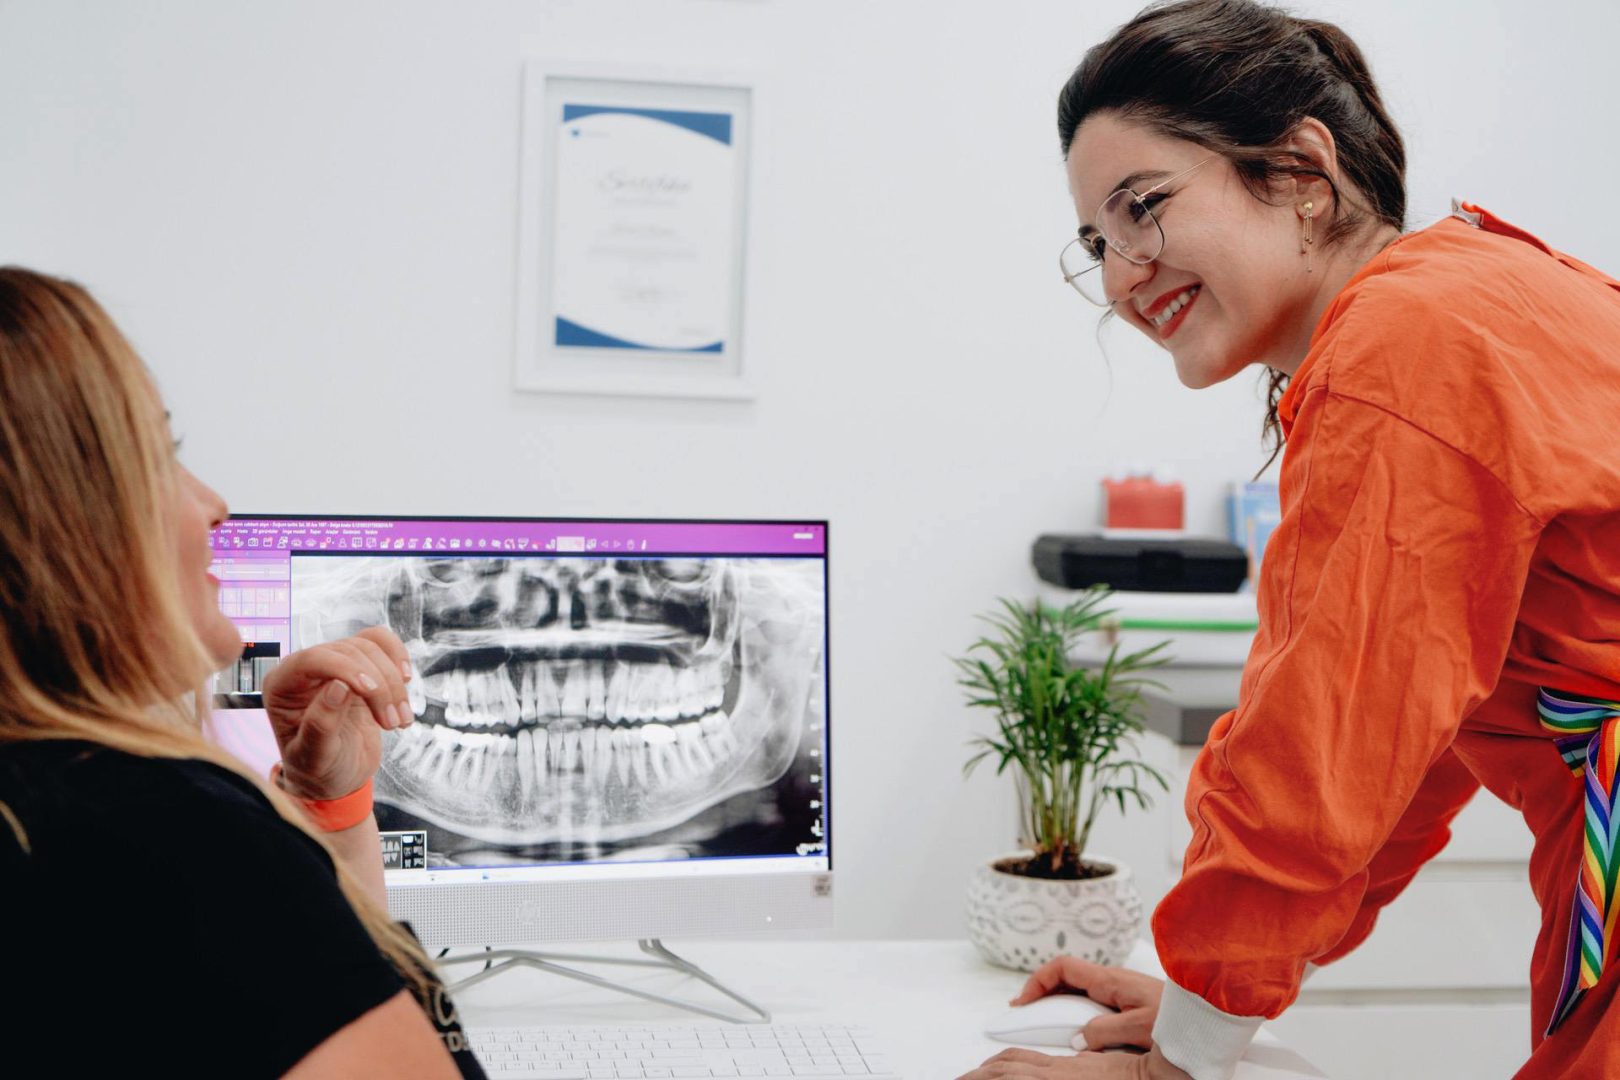 Dental assistant smiling at patient and showing x-rays on computer